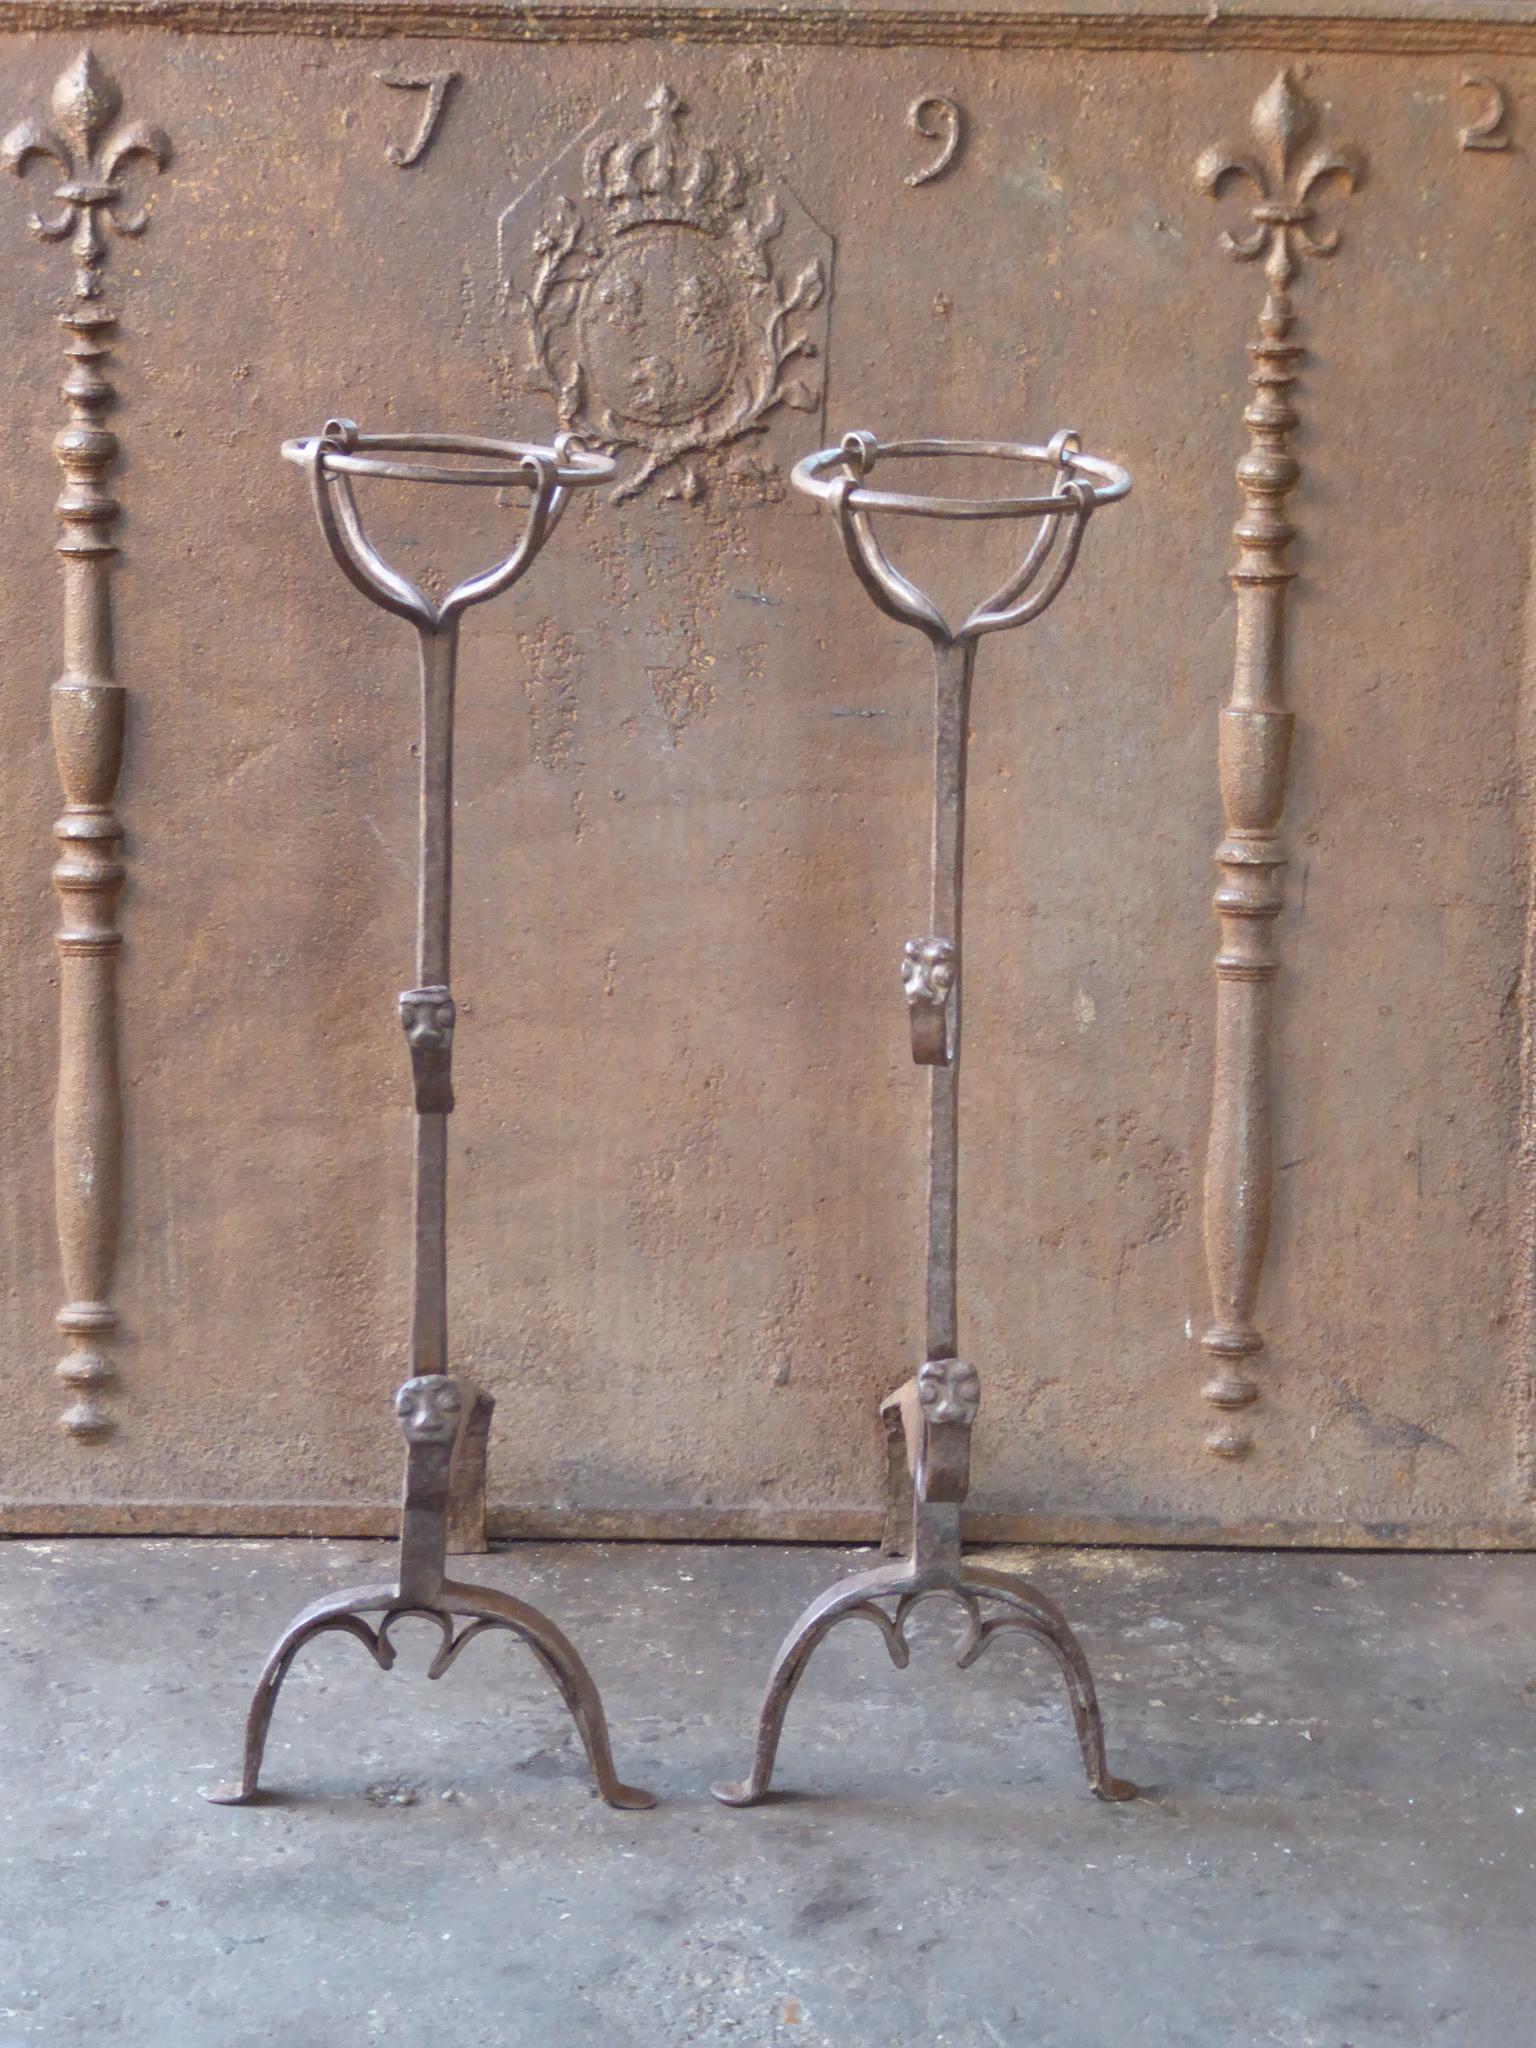 Beautifully forged 17th century French andirons made of wrought iron. The style of the andirons is Louis III. The andirons have decorated spit hooks to grill food. They are in a good condition.